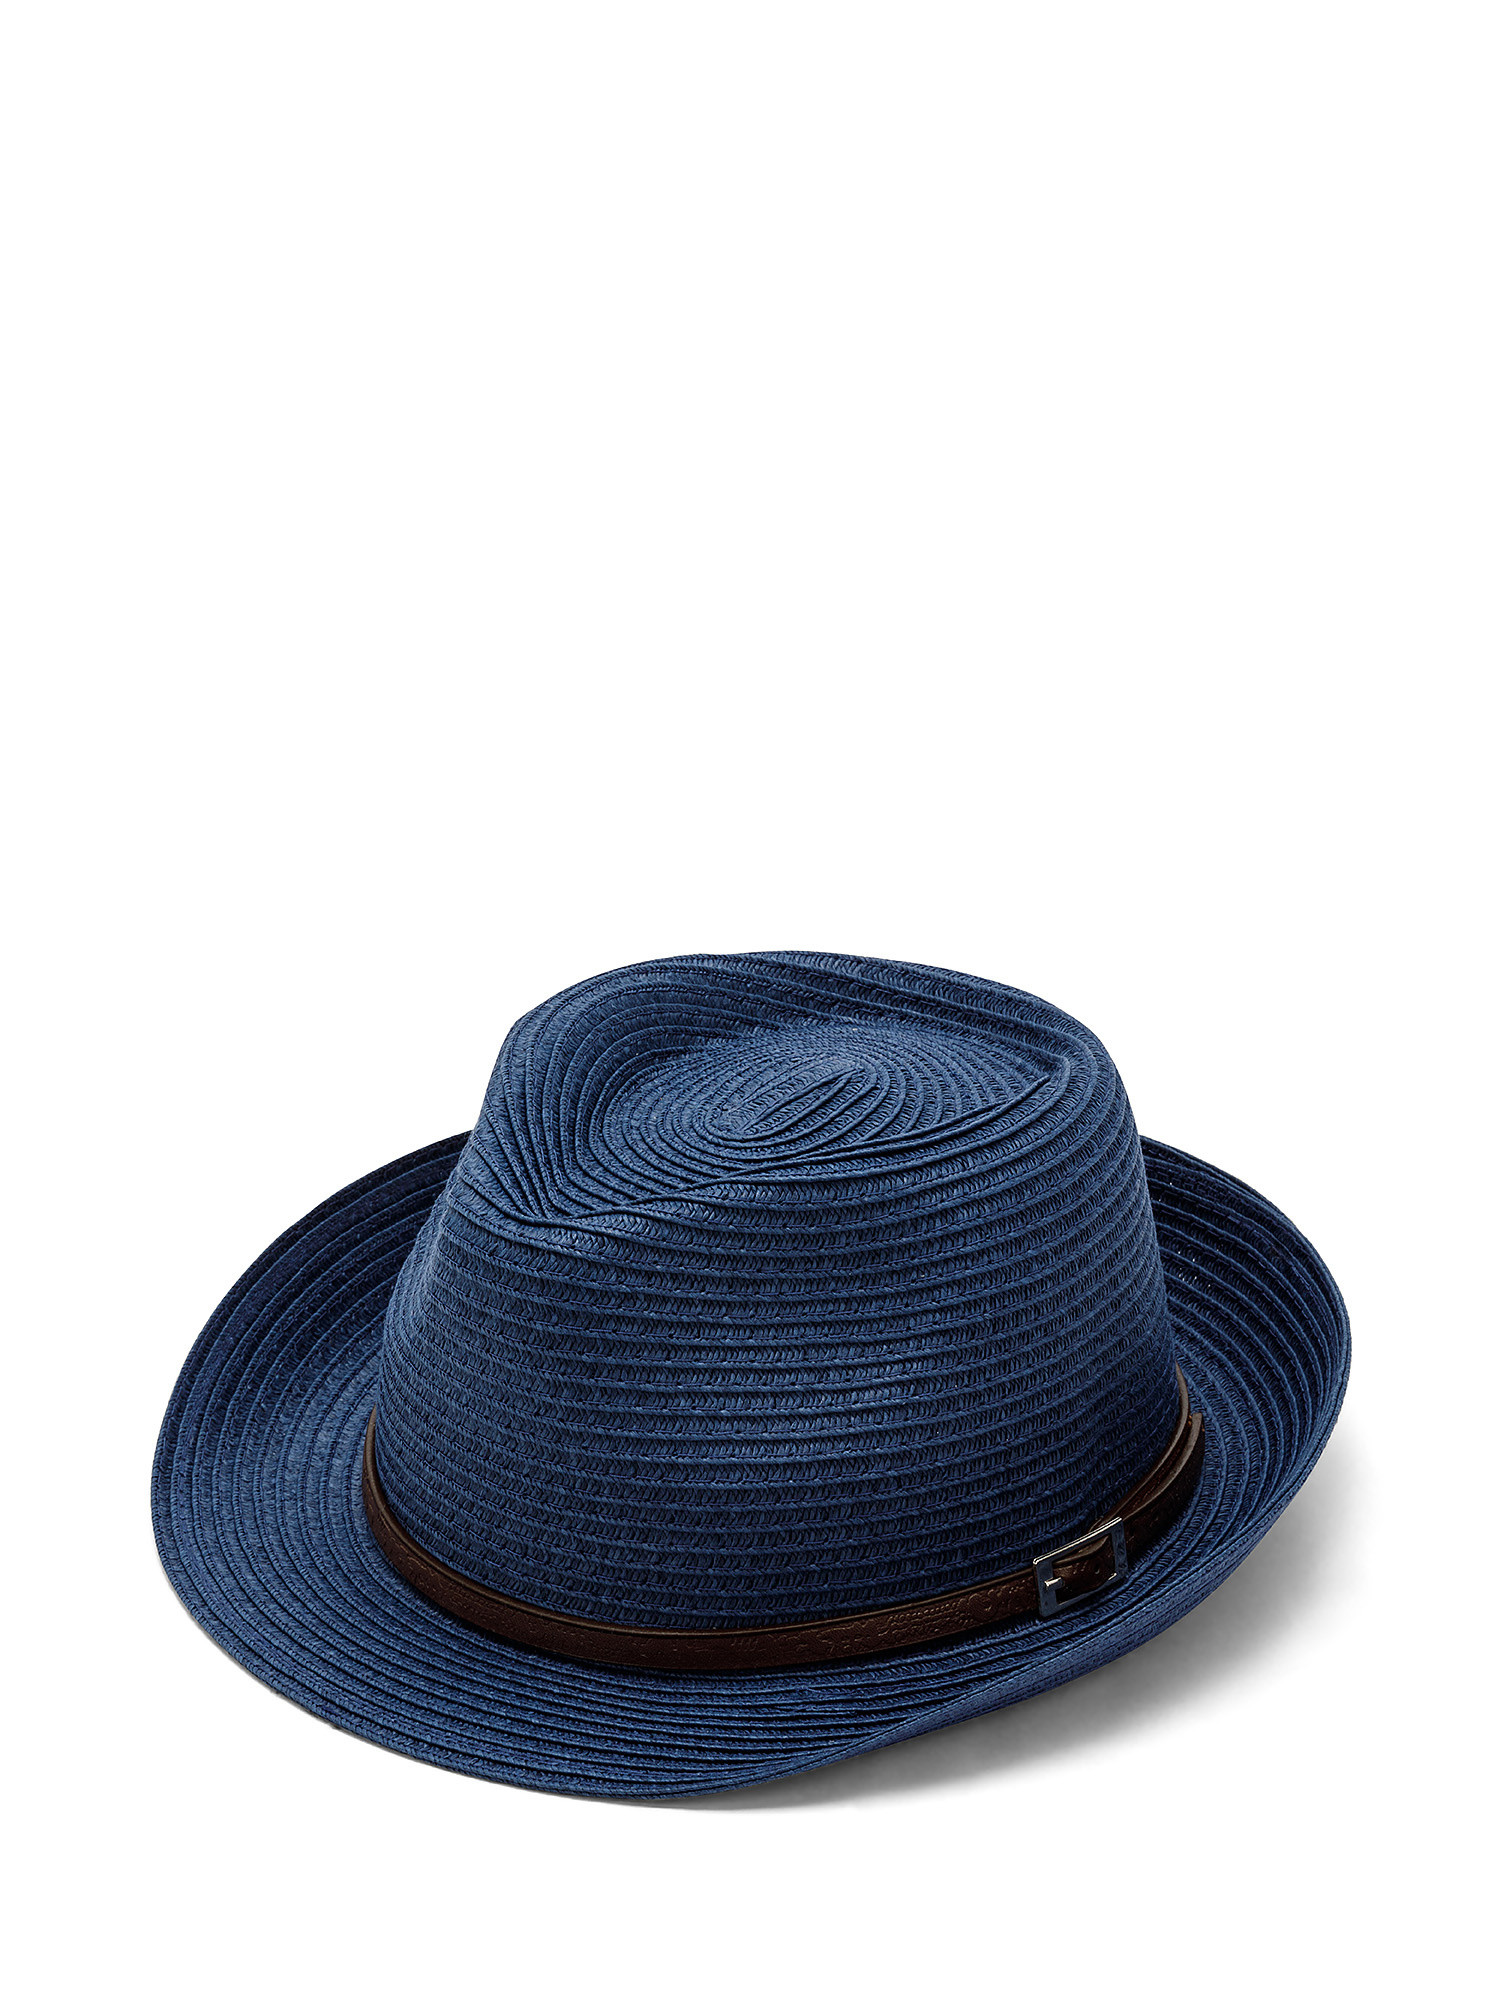 Luca D'Altieri - Alpinetto hat with strap, Blue, large image number 0